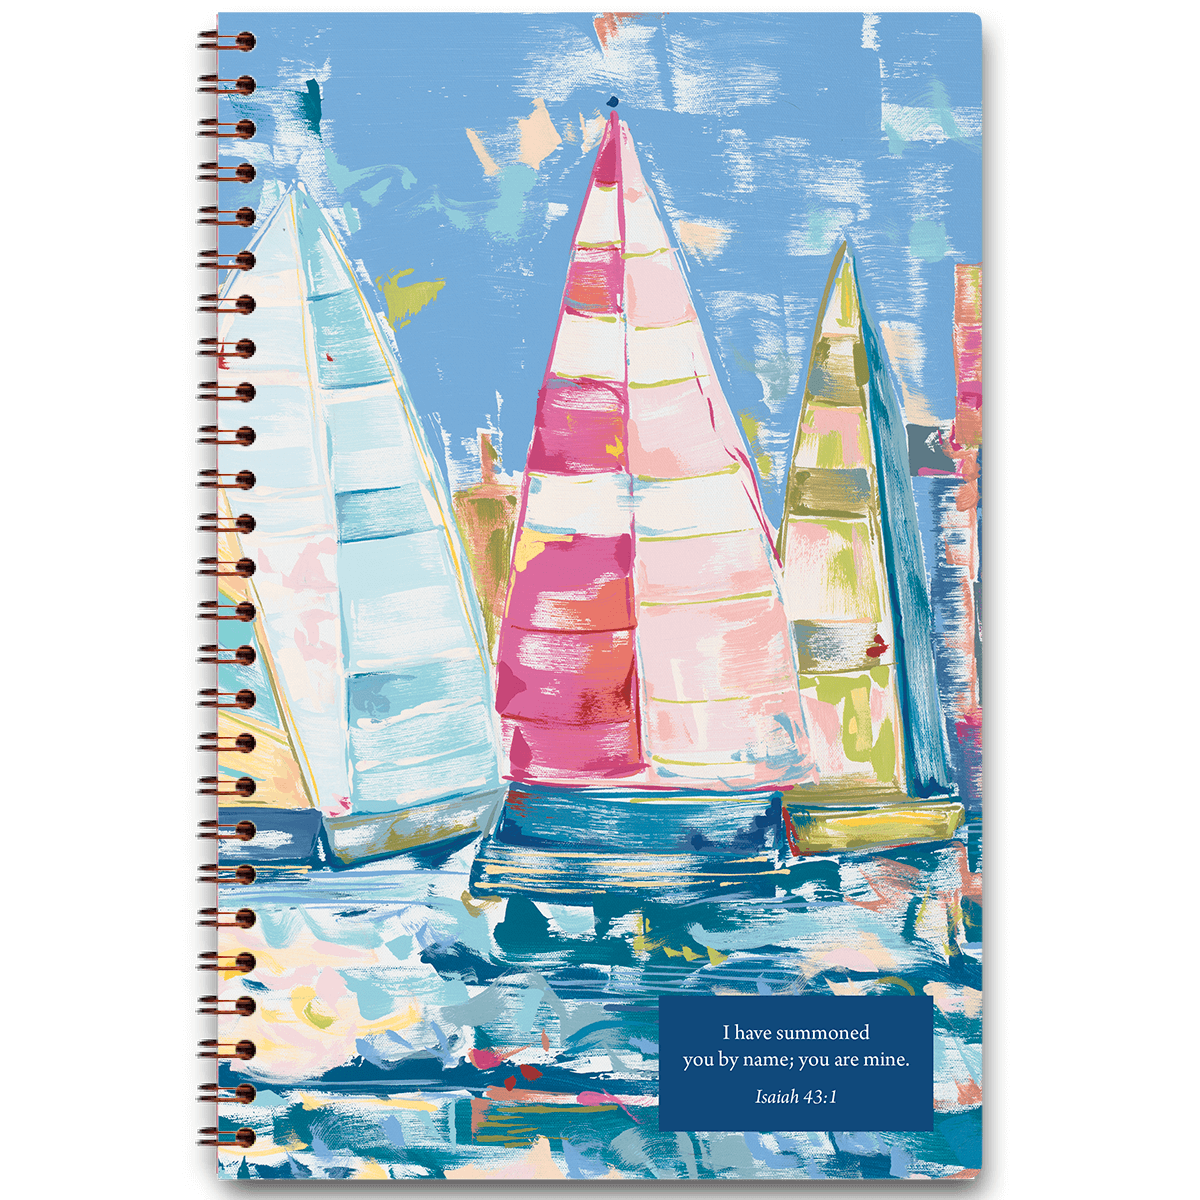 A tribute to sailing designed by Carolyn Joe with personalized scriptures on every page.  Paper Sunday has created the "Perfect Christian Gift".  Sailboat Journal, Personalized Scripture, Scripture journal, Bible Verse Journal, Prayer Journal, Bible Journal, Faith Journal, Meditation Journal, Personalized Bible